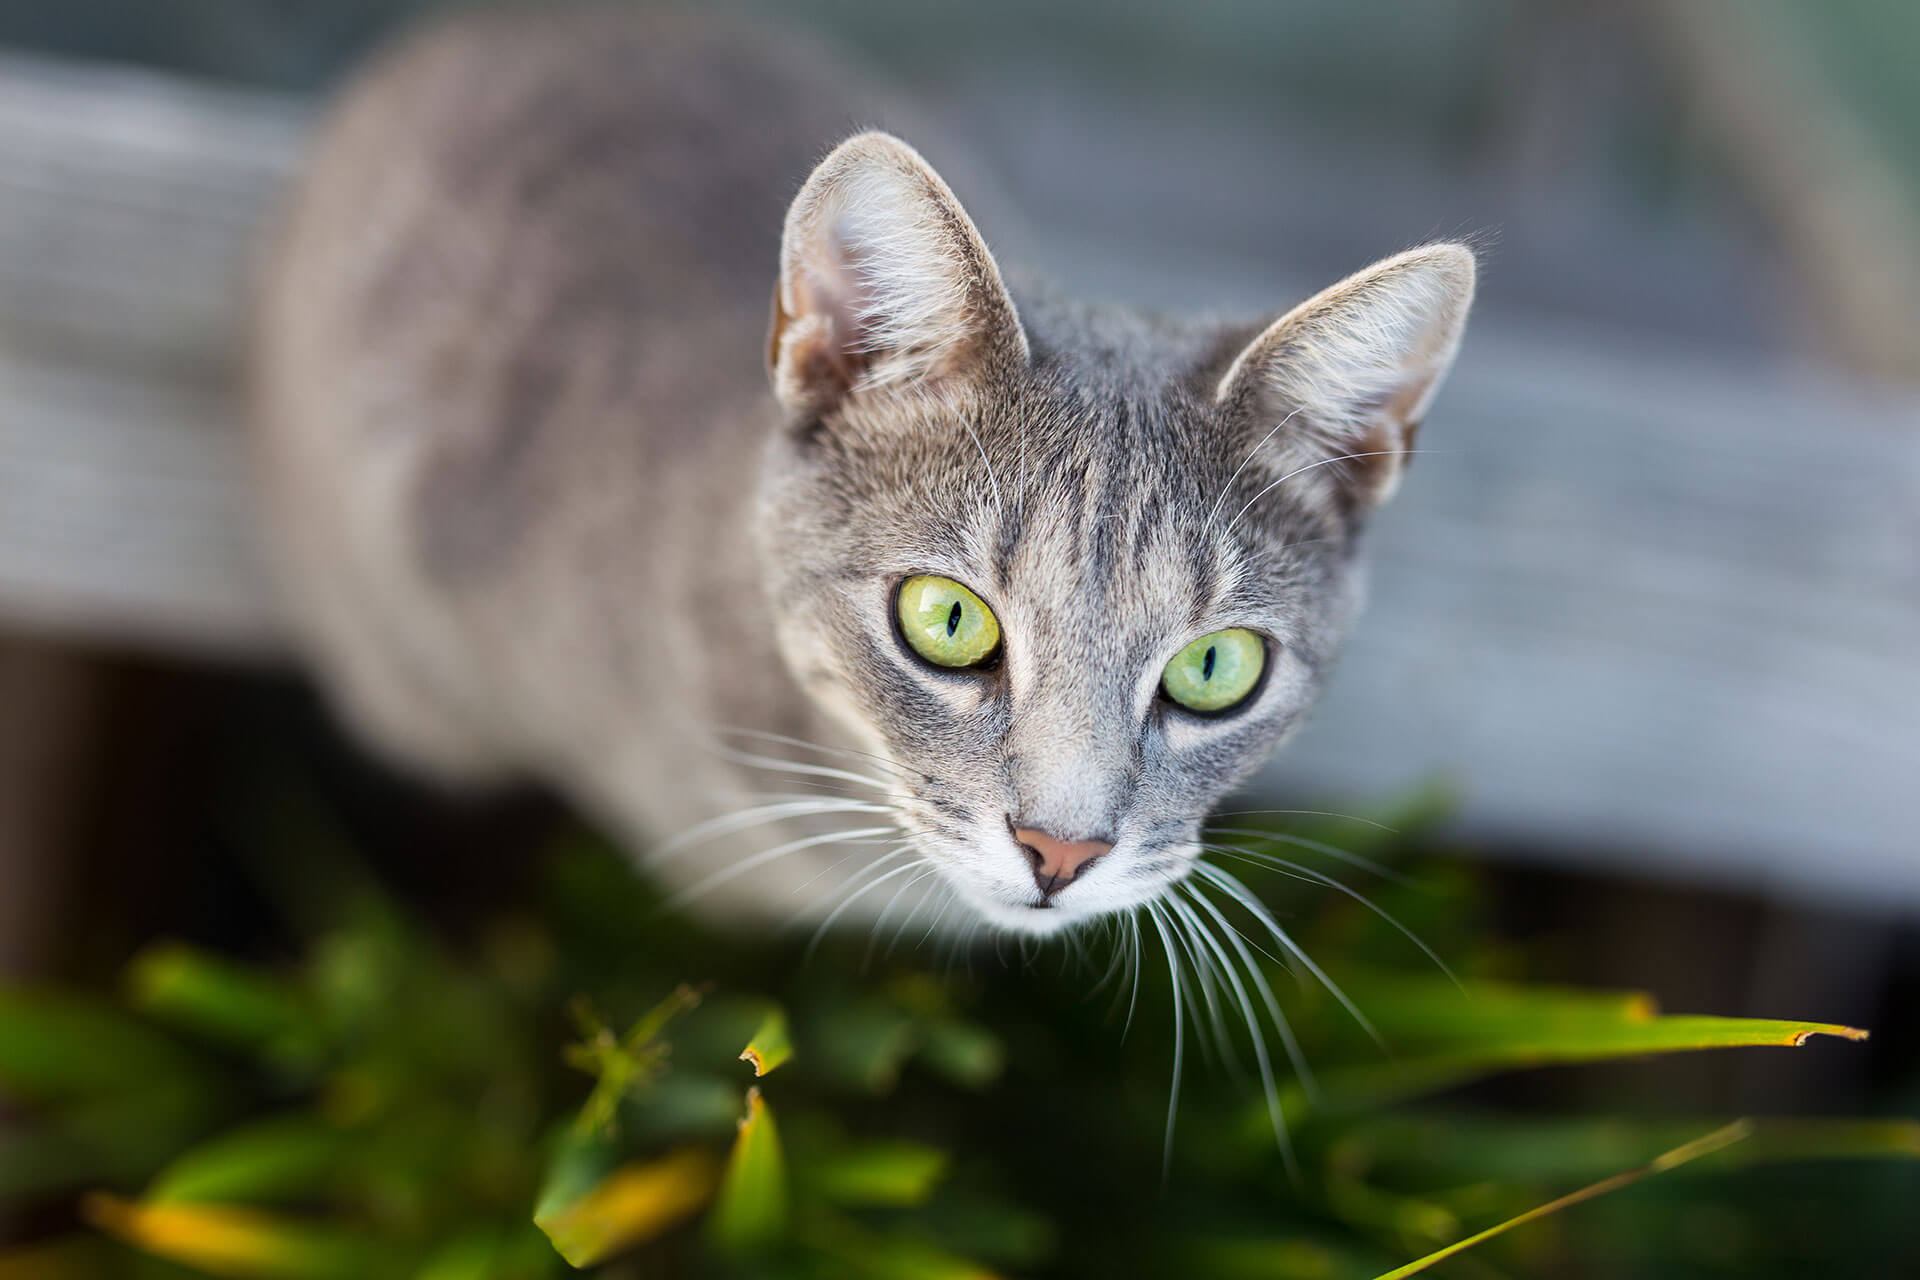 Cat sense: How to stay on top of your cat's wanderings